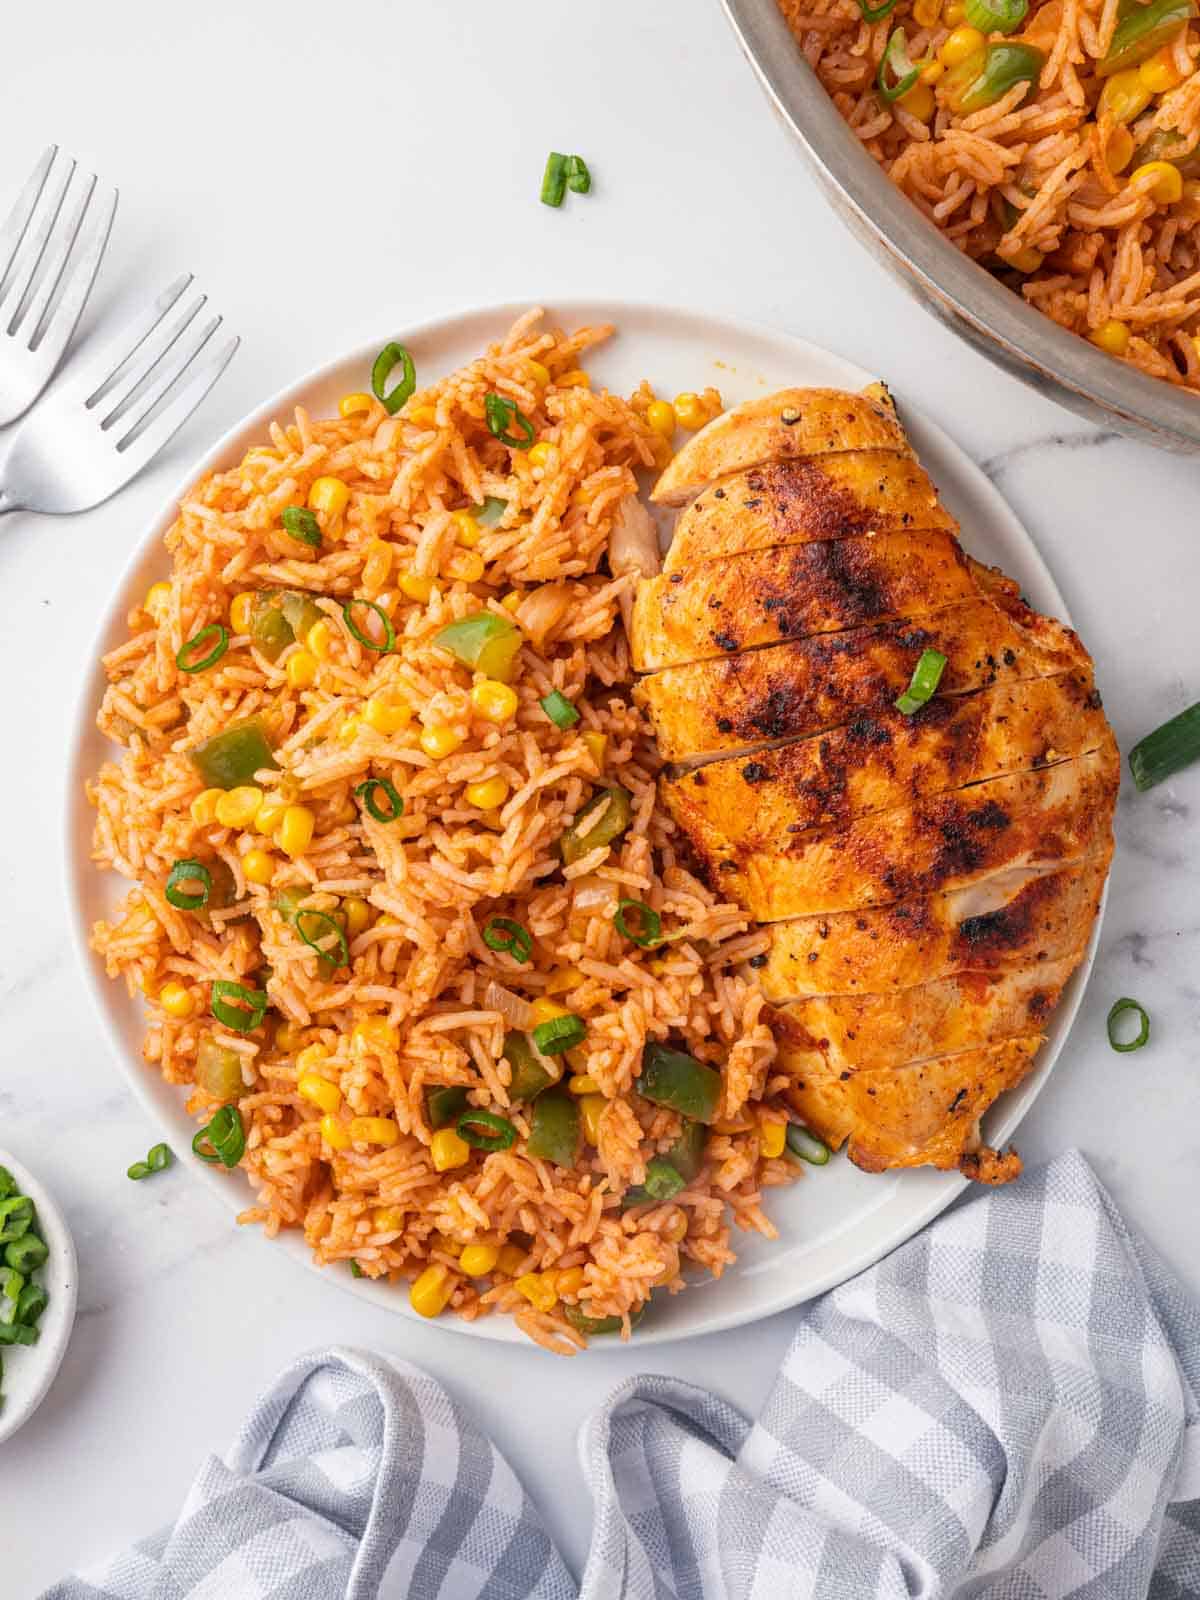 A plate with rice and chicken.